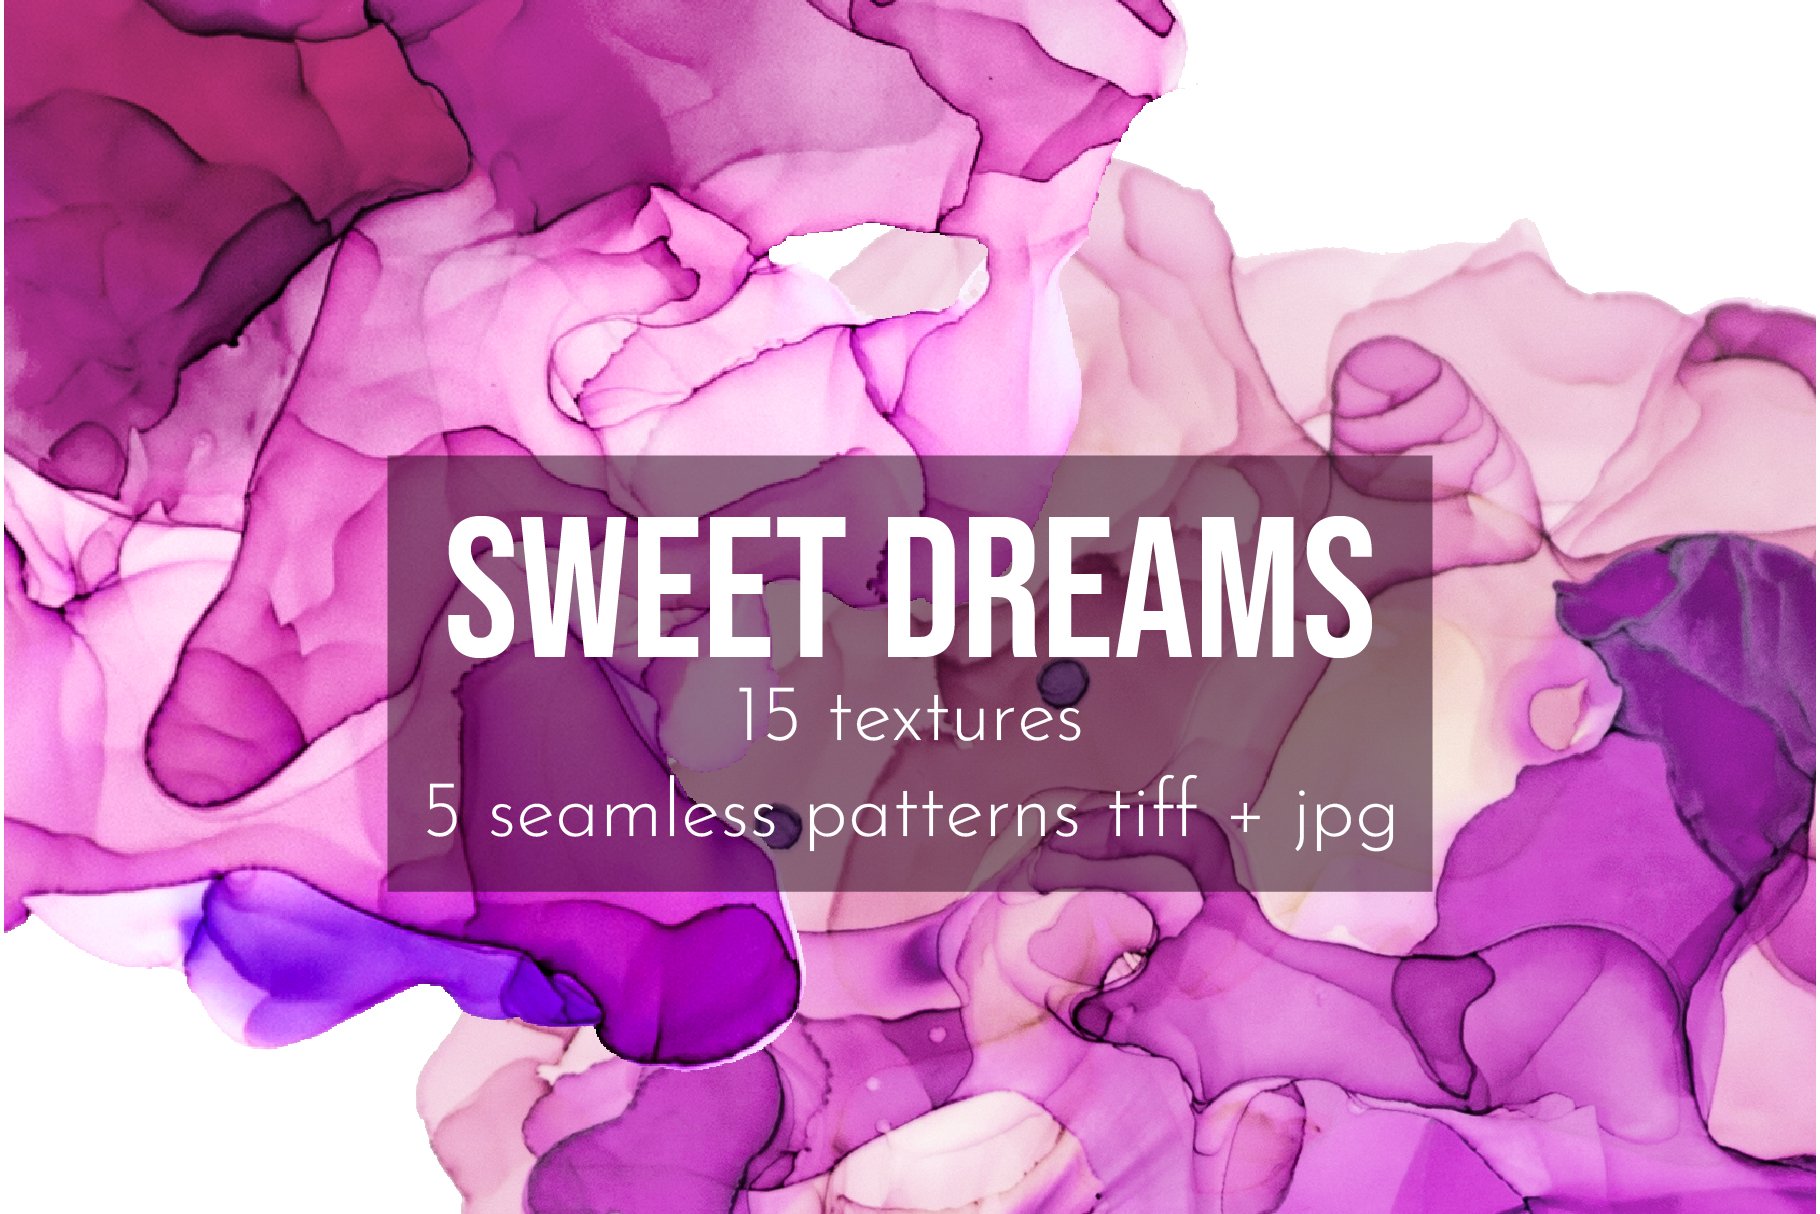 Purple & Pink Alcohol Ink Textures cover image.